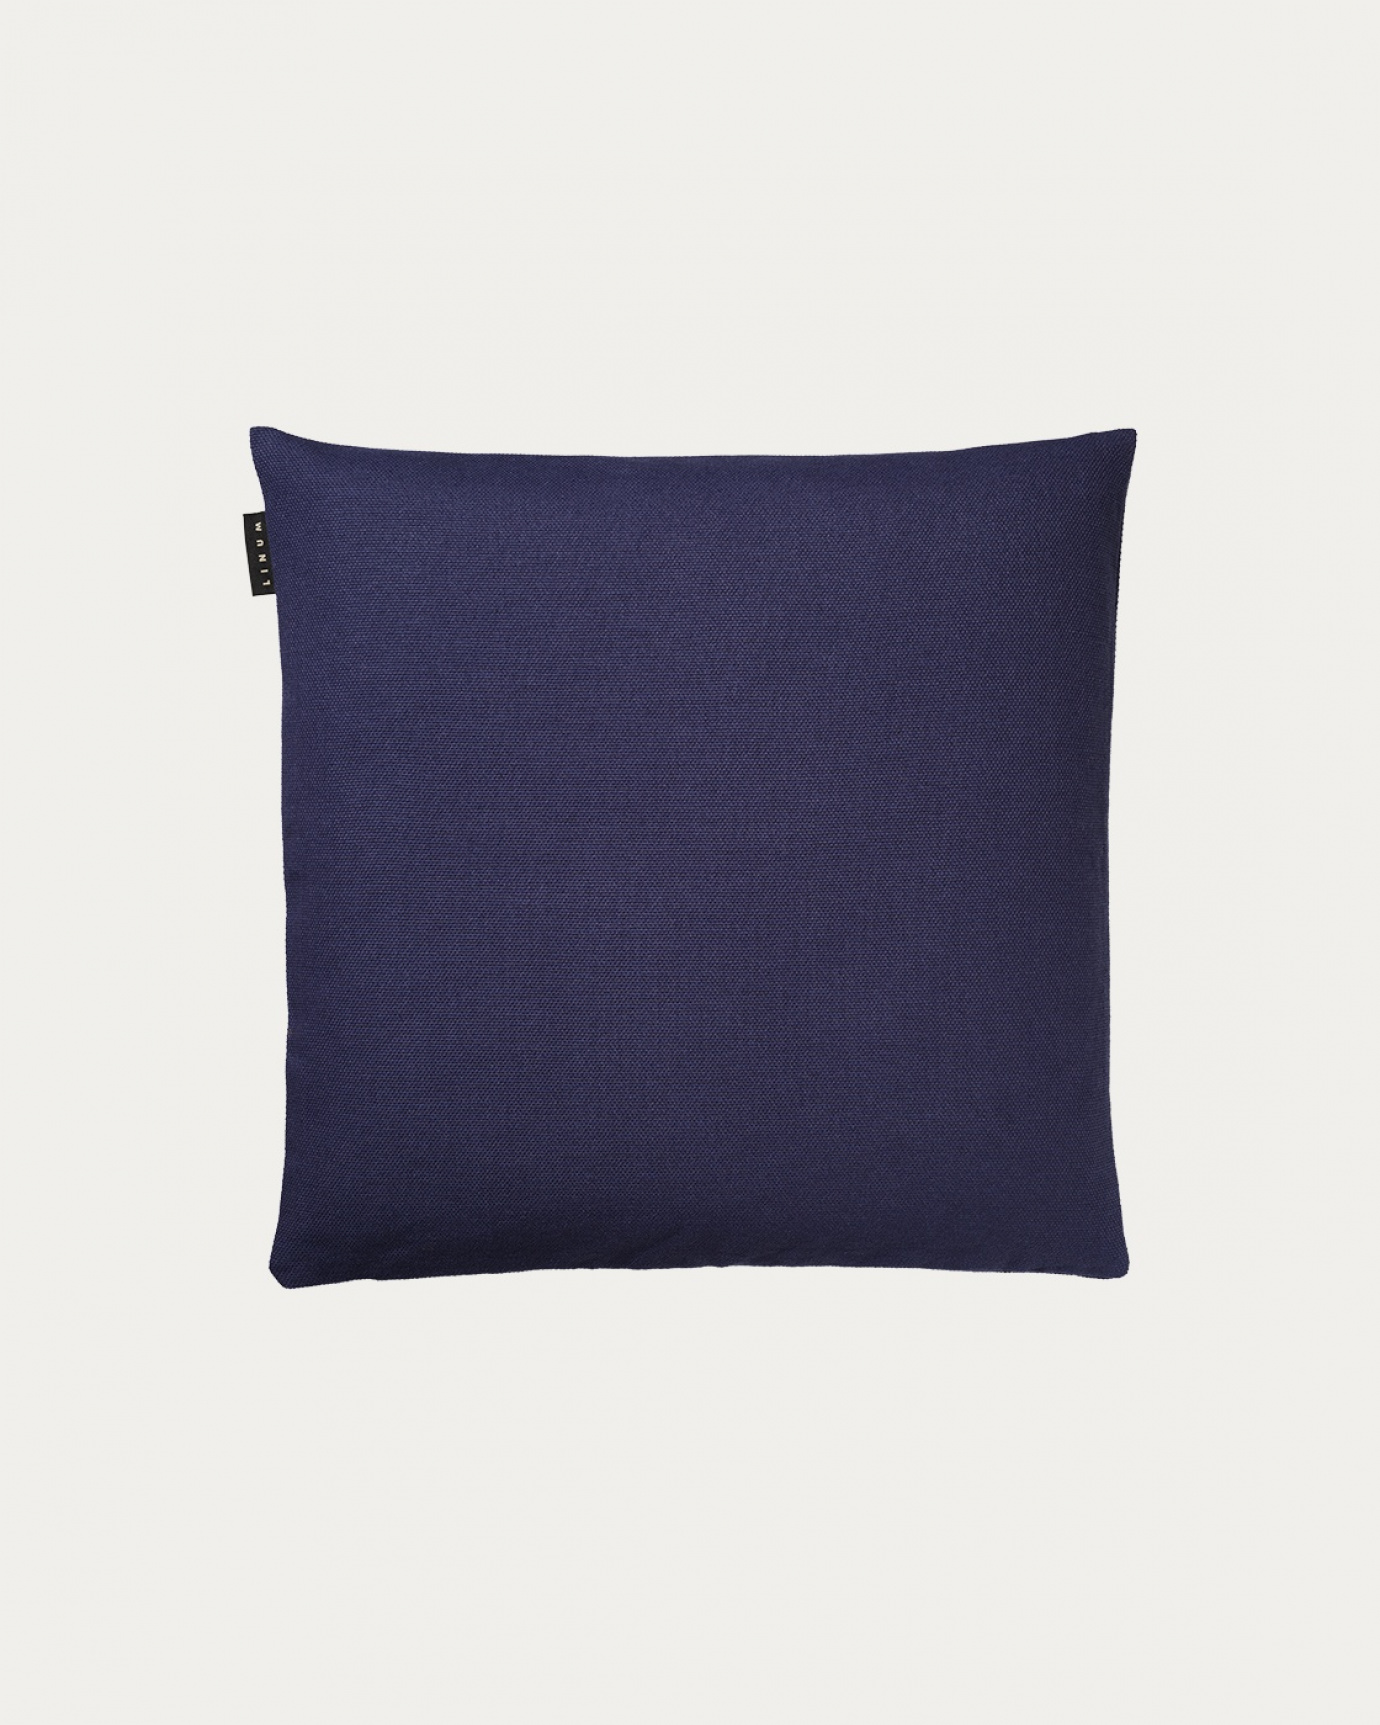 Product image ink blue PEPPER cushion cover made of soft cotton from LINUM DESIGN. Easy to wash and durable for generations. Size 40x40 cm.